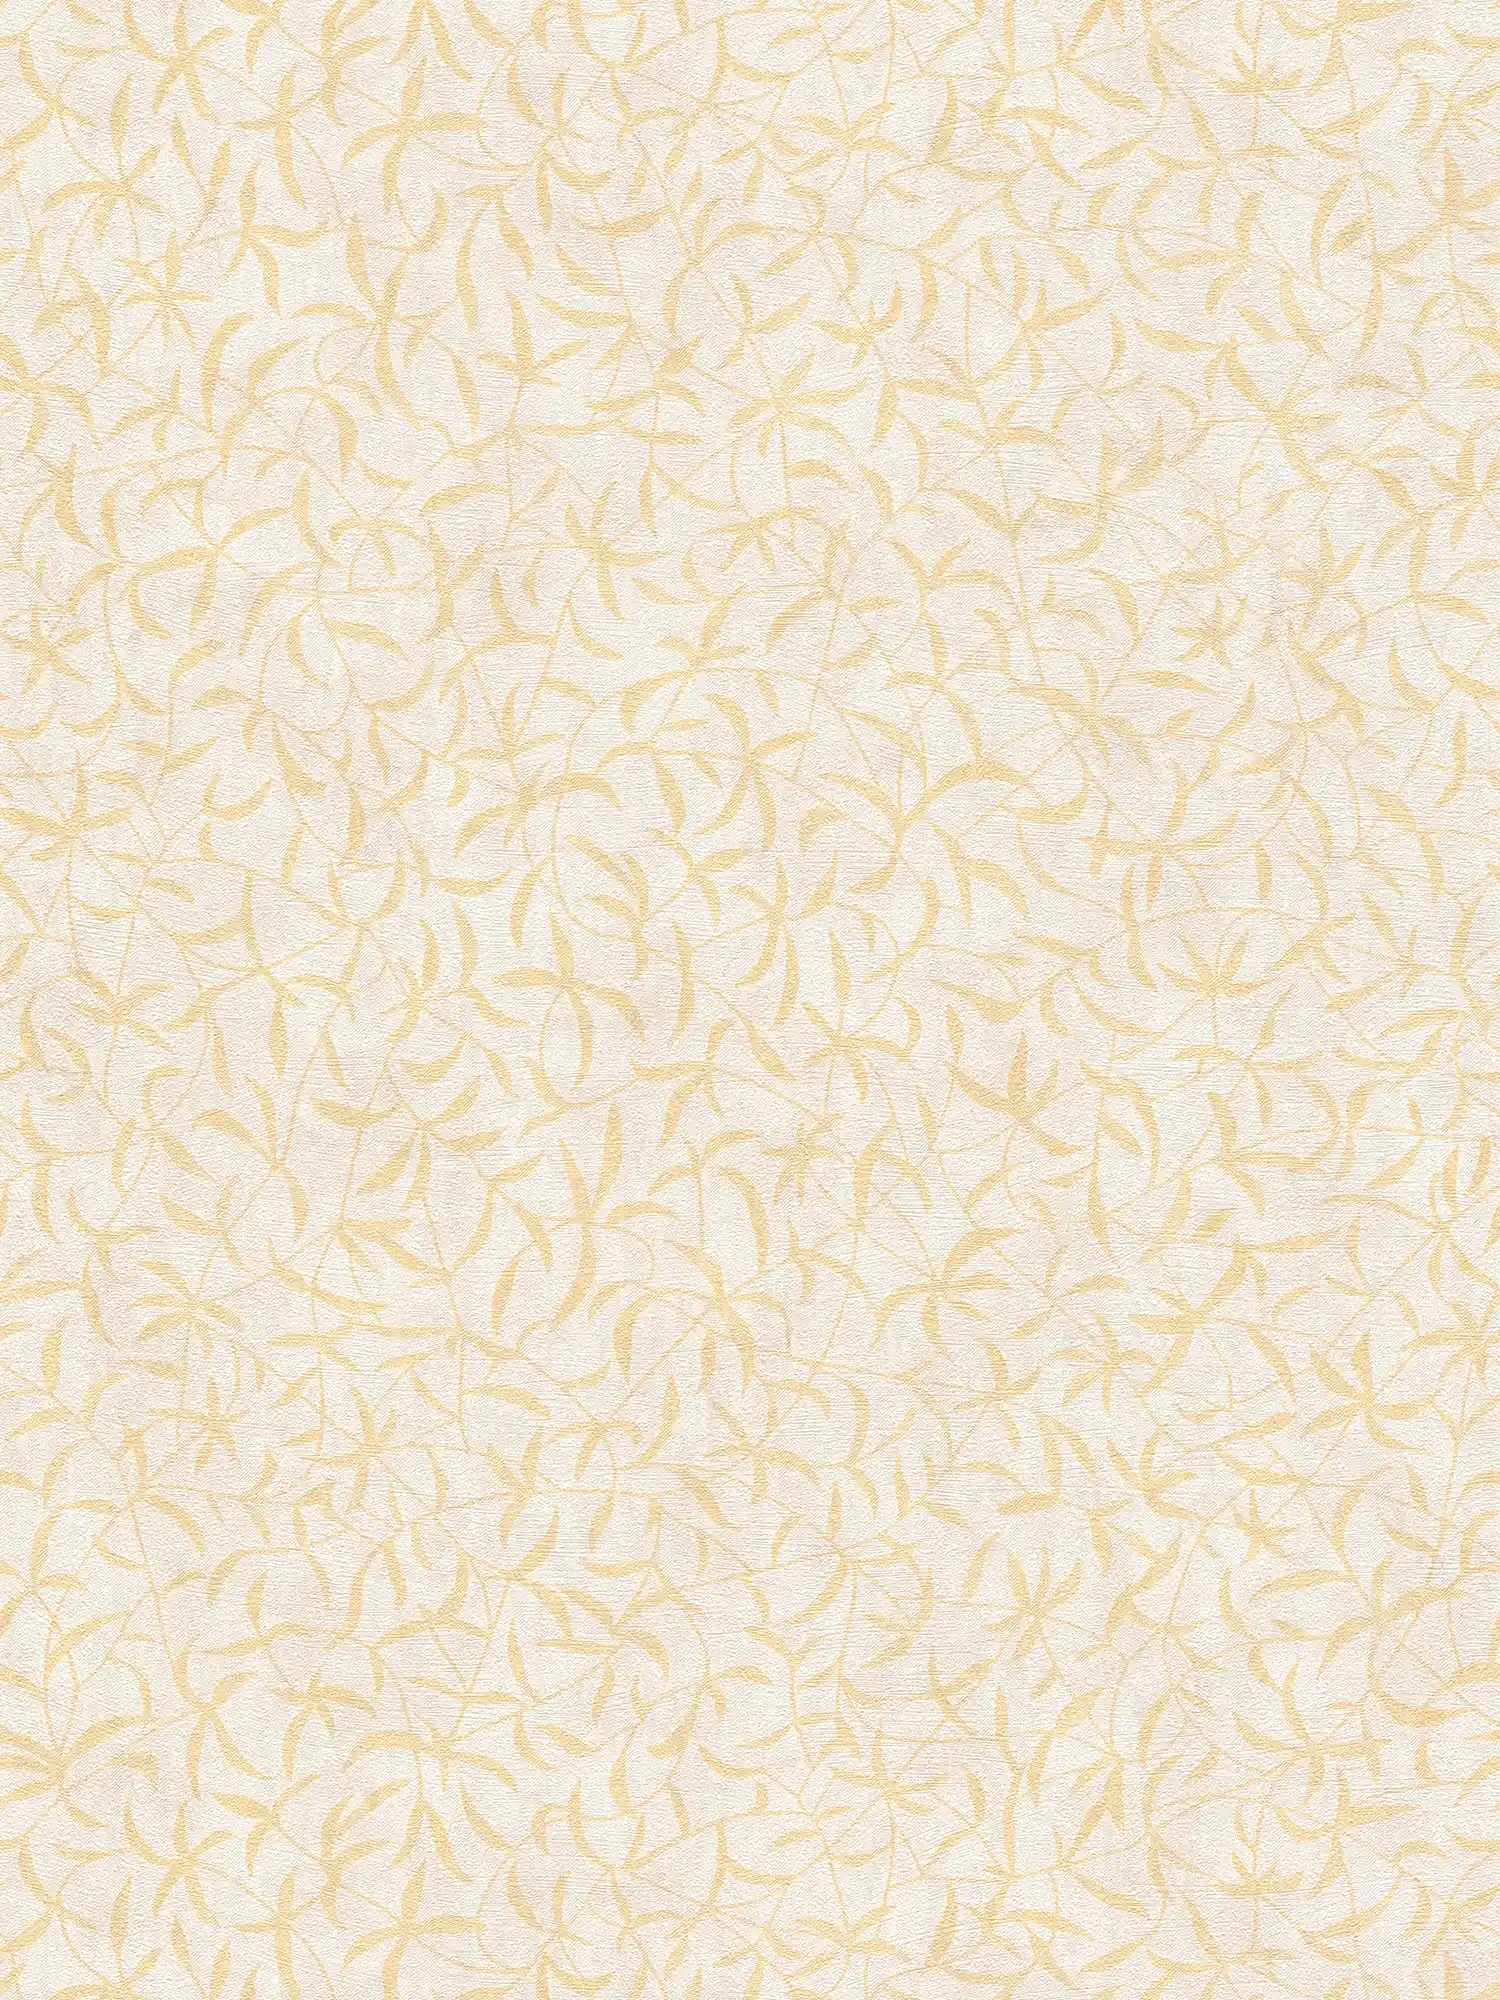 Non-woven wallpaper with branches and flowers - cream, beige, yellow
